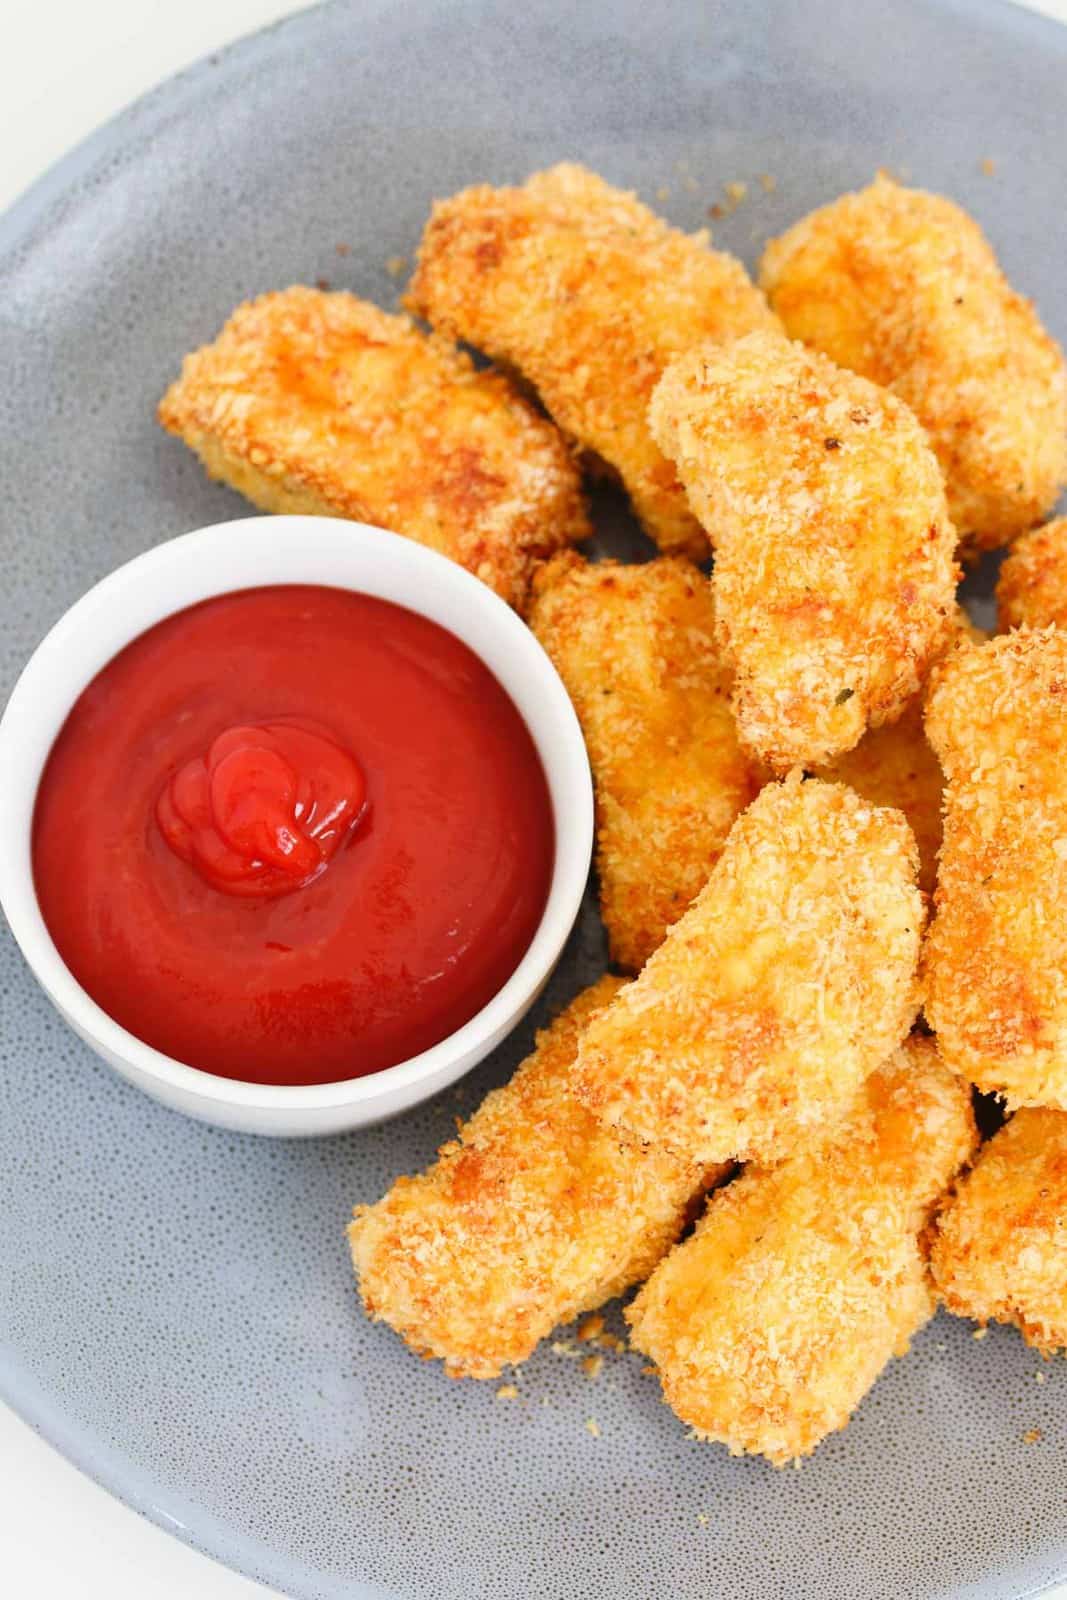 A plate of golden homemade chicken bites on a plate with a bowl of sauce.